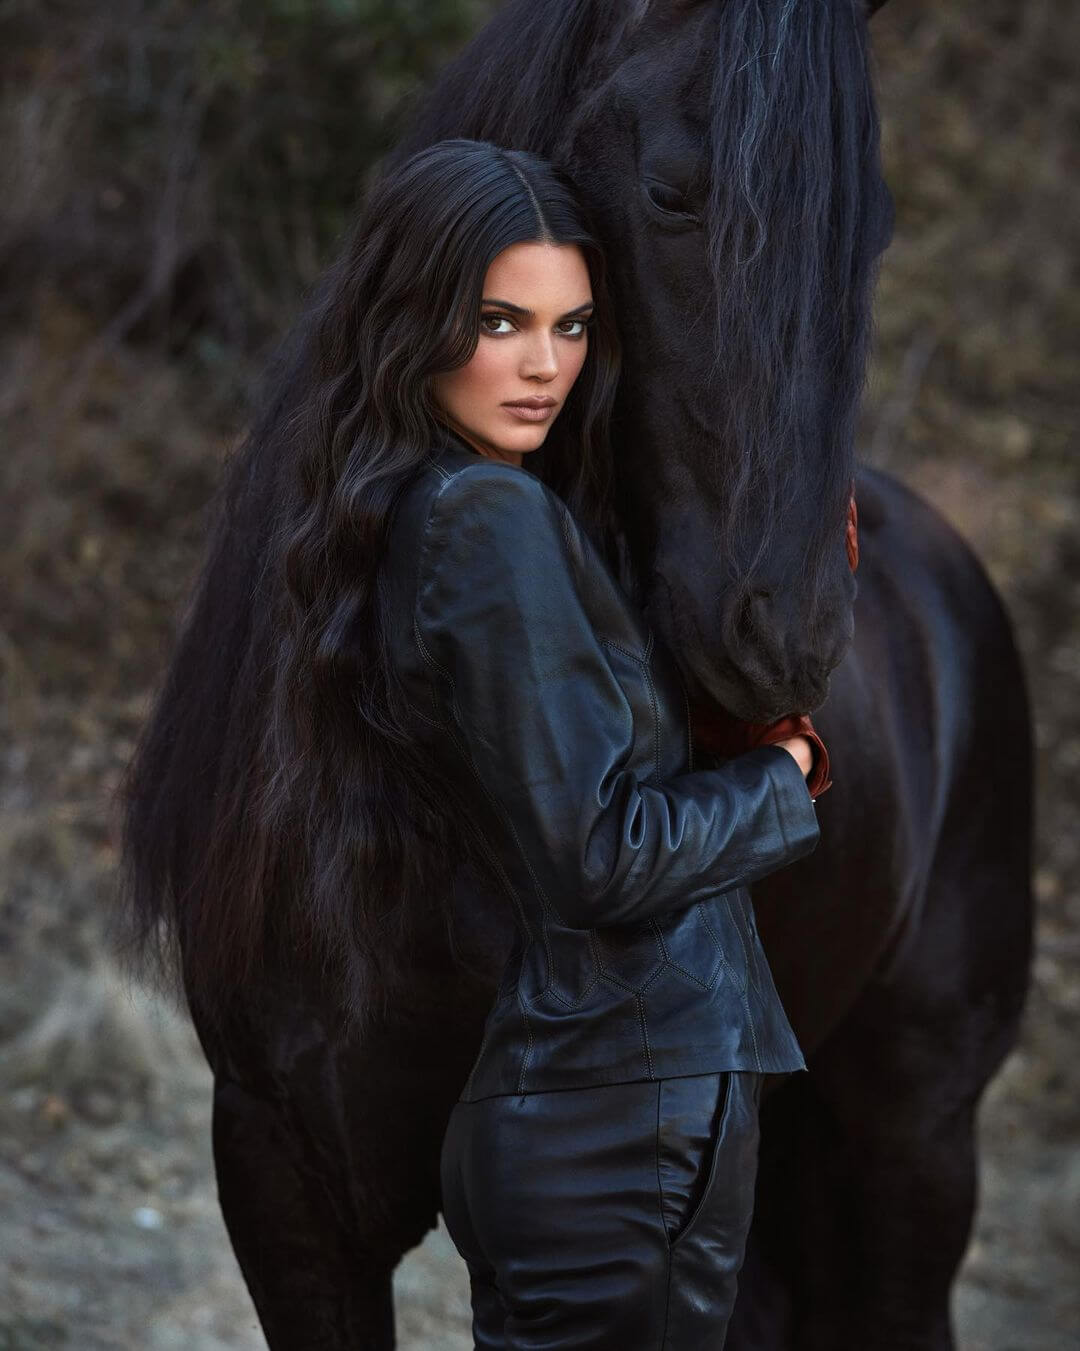 Leather on Leather ft. KENDALL JENNER